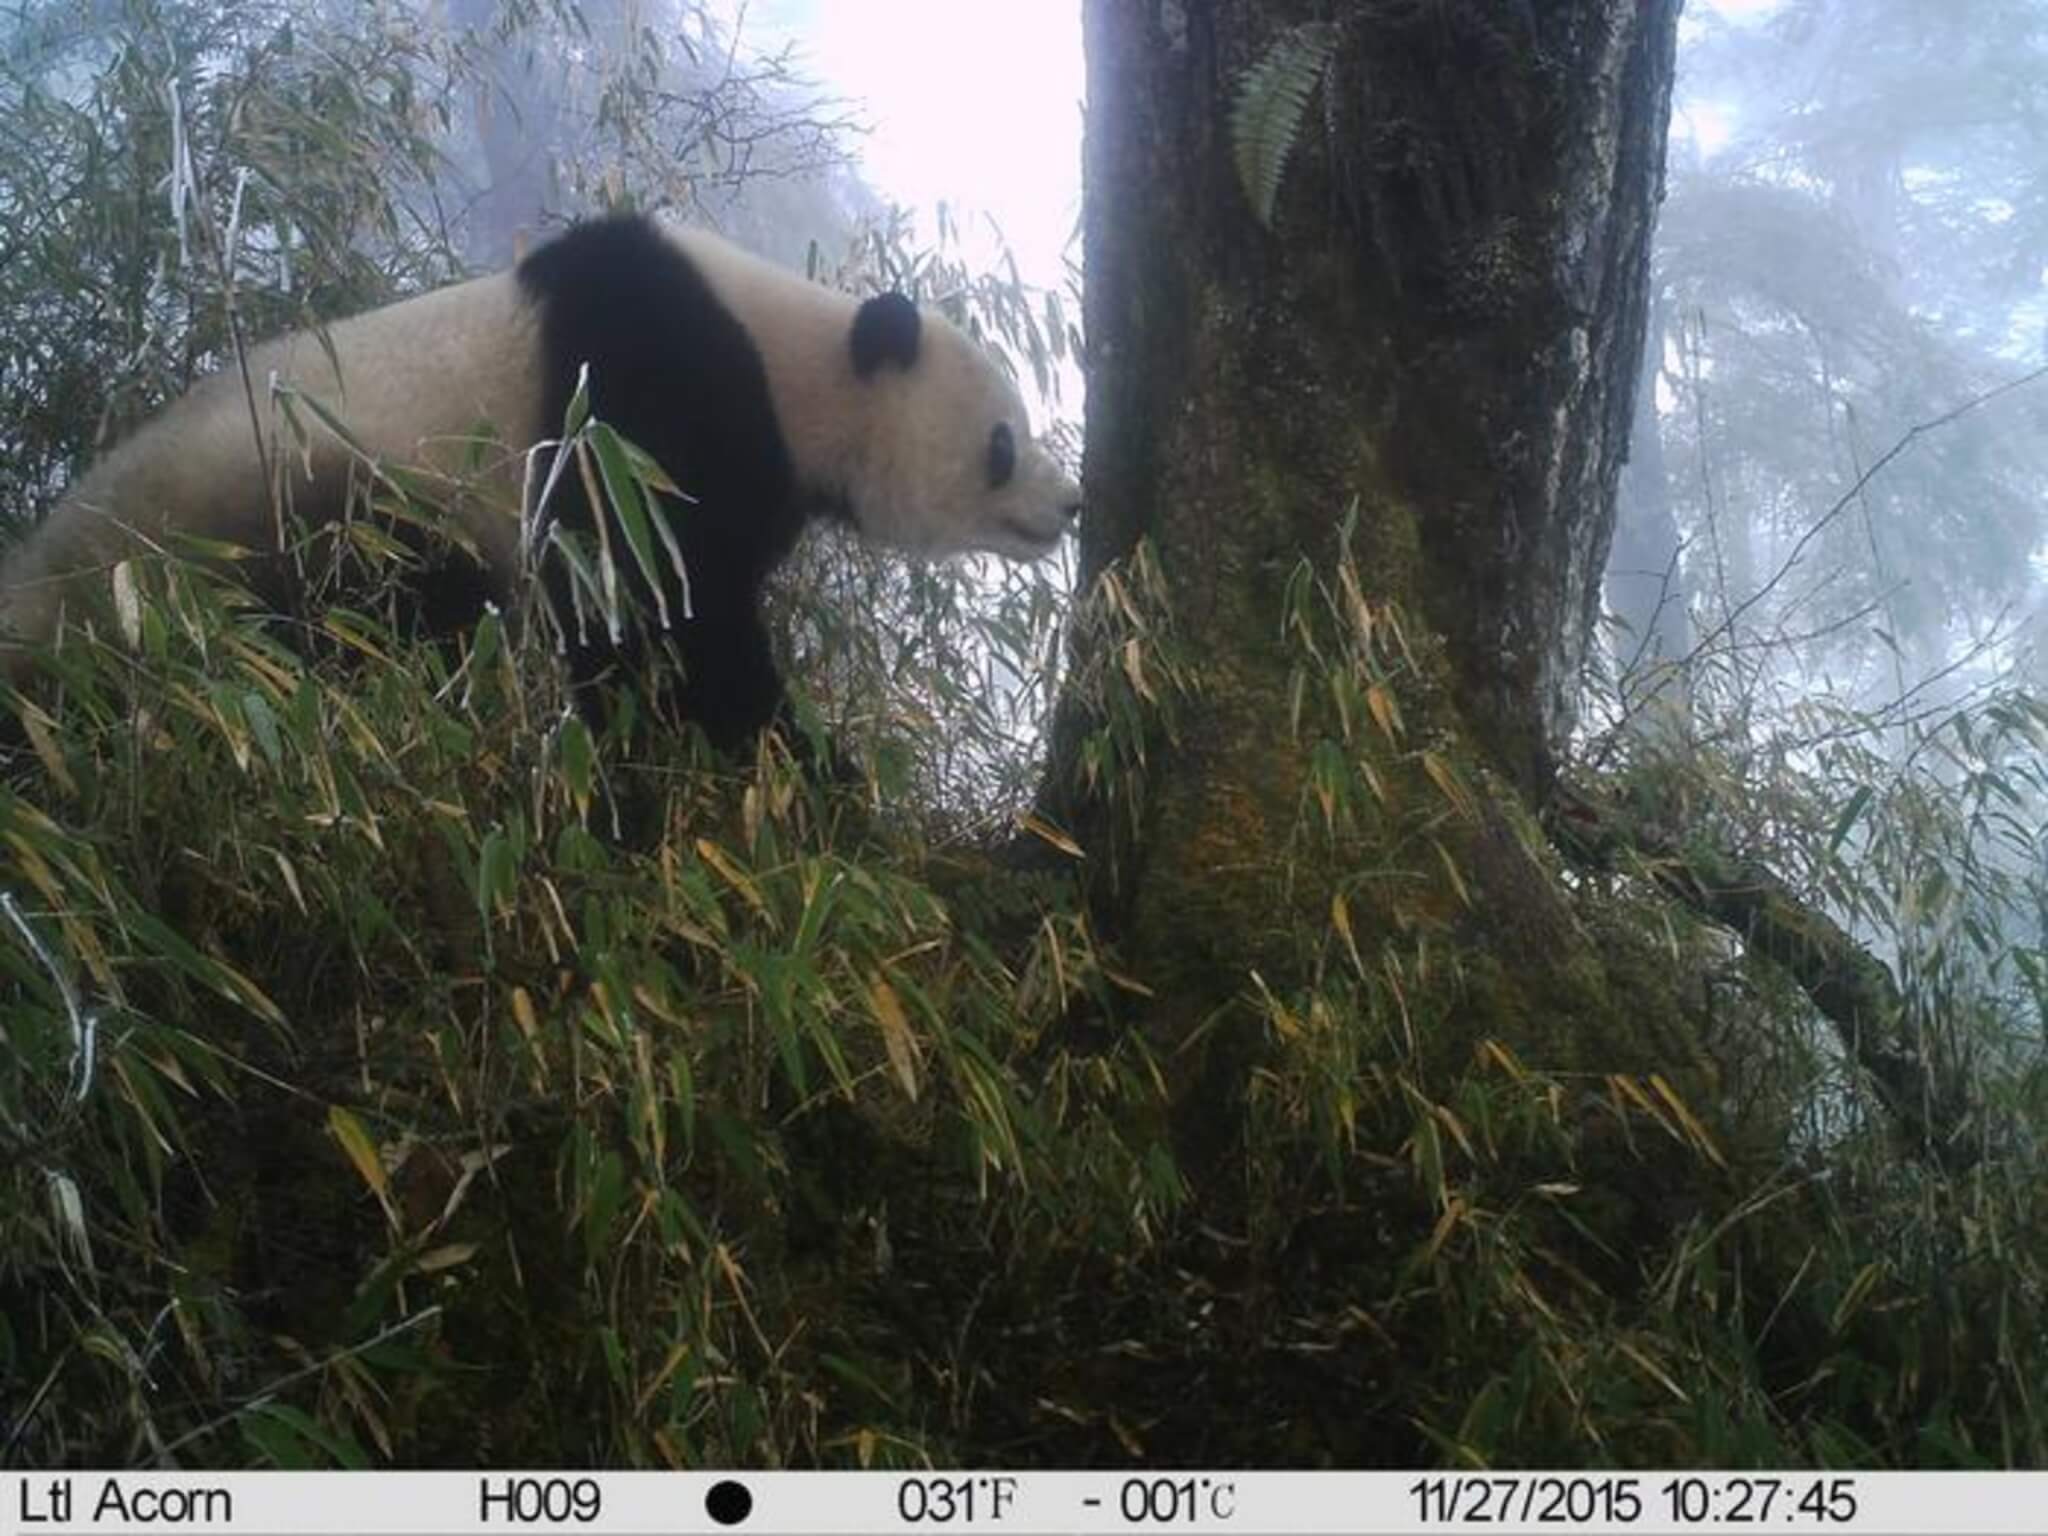 A giant panda in the Wolong Nature Reserve in China's Szechuan Province checks on recent social postings on a scent-marking tree